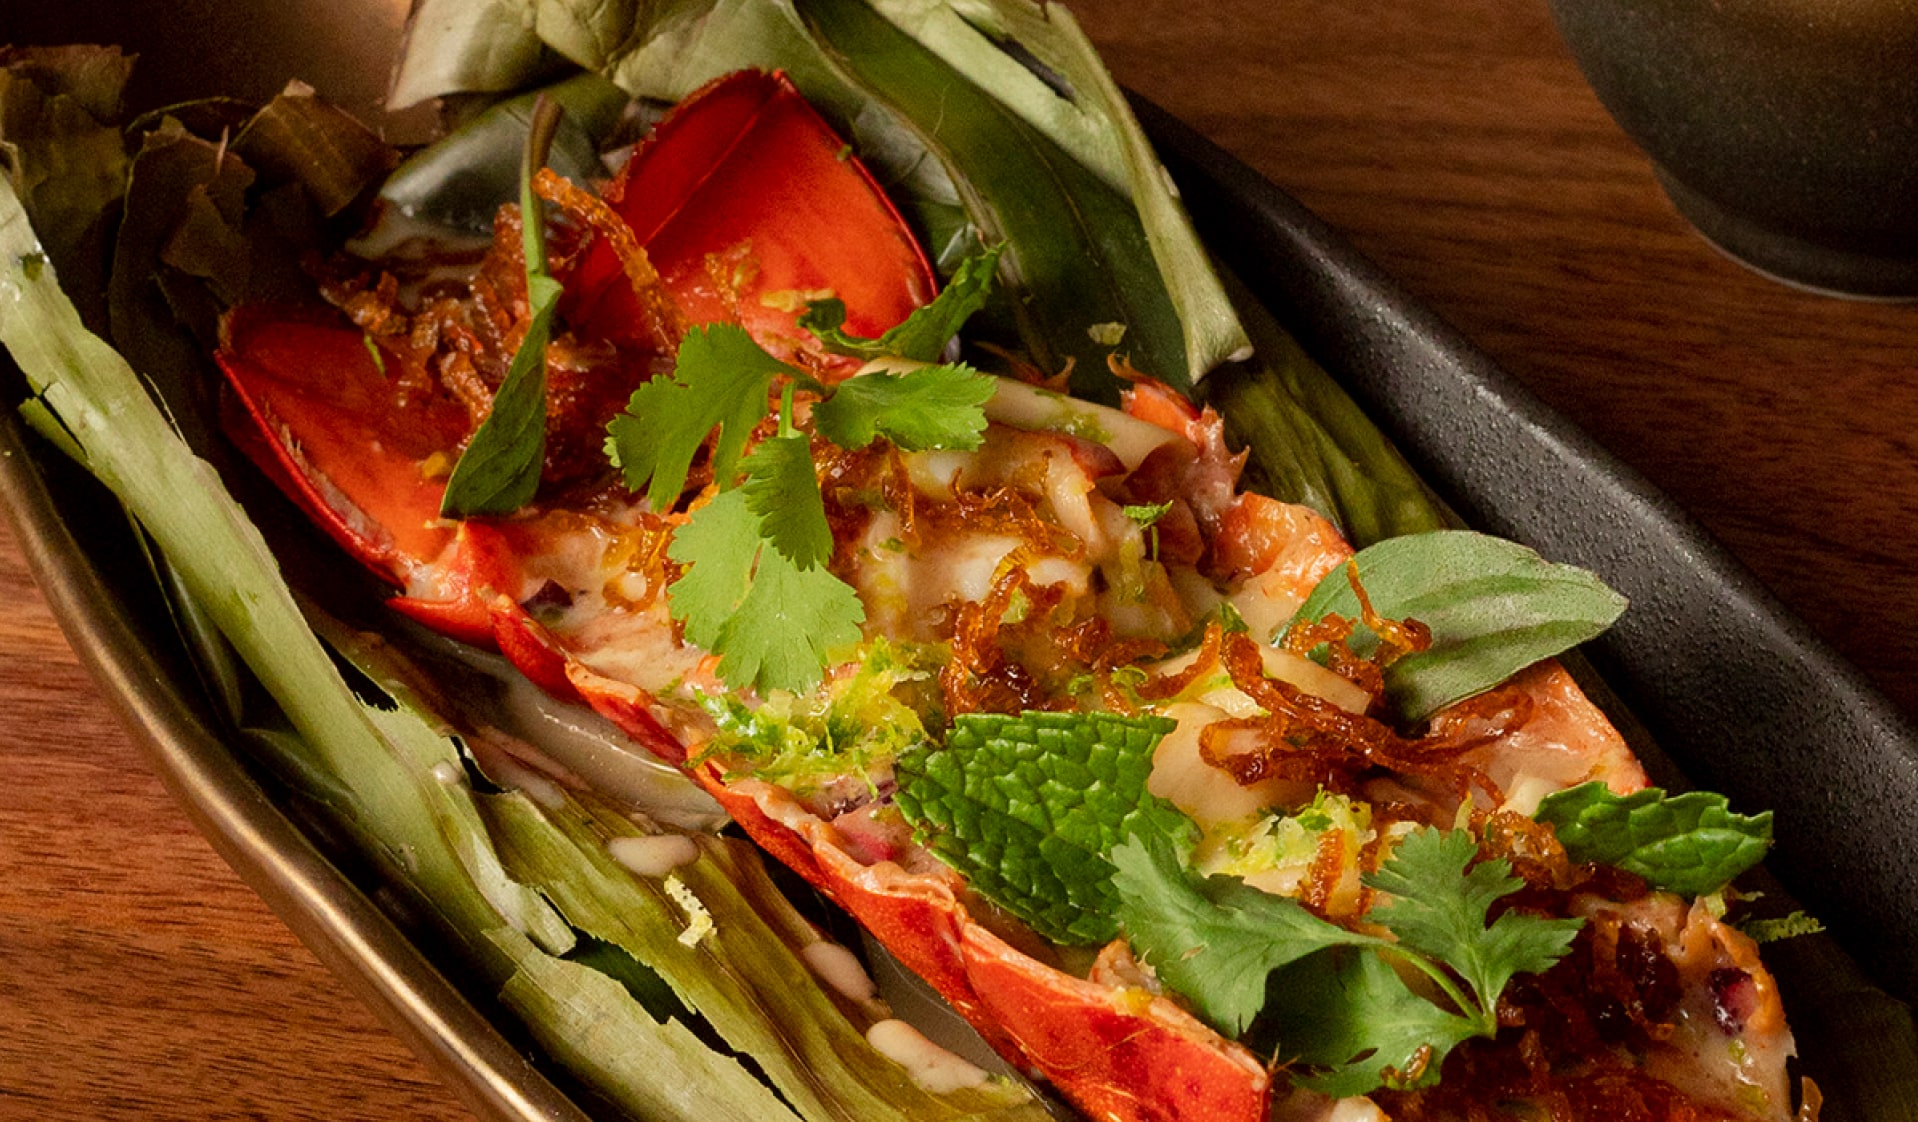 Hearth Roasted Lobster served in a black oval bowl.